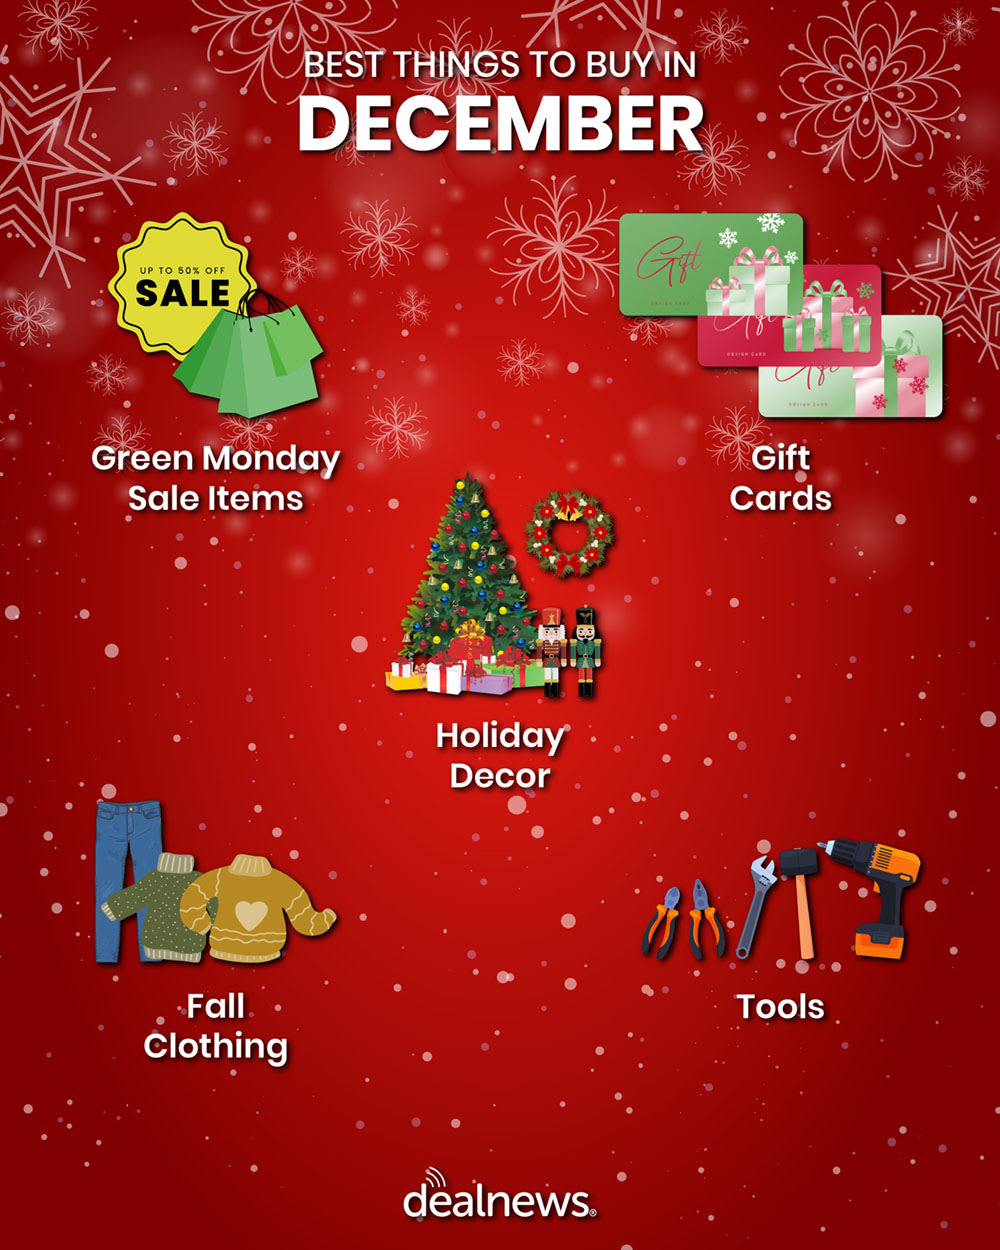 https://c.dlnws.com/image/upload/c_limit,f_auto,q_auto,w_1800/v1701708811/Blog%20Infographics/DN-what-to-buy-in-December-2023-infographic.jpg